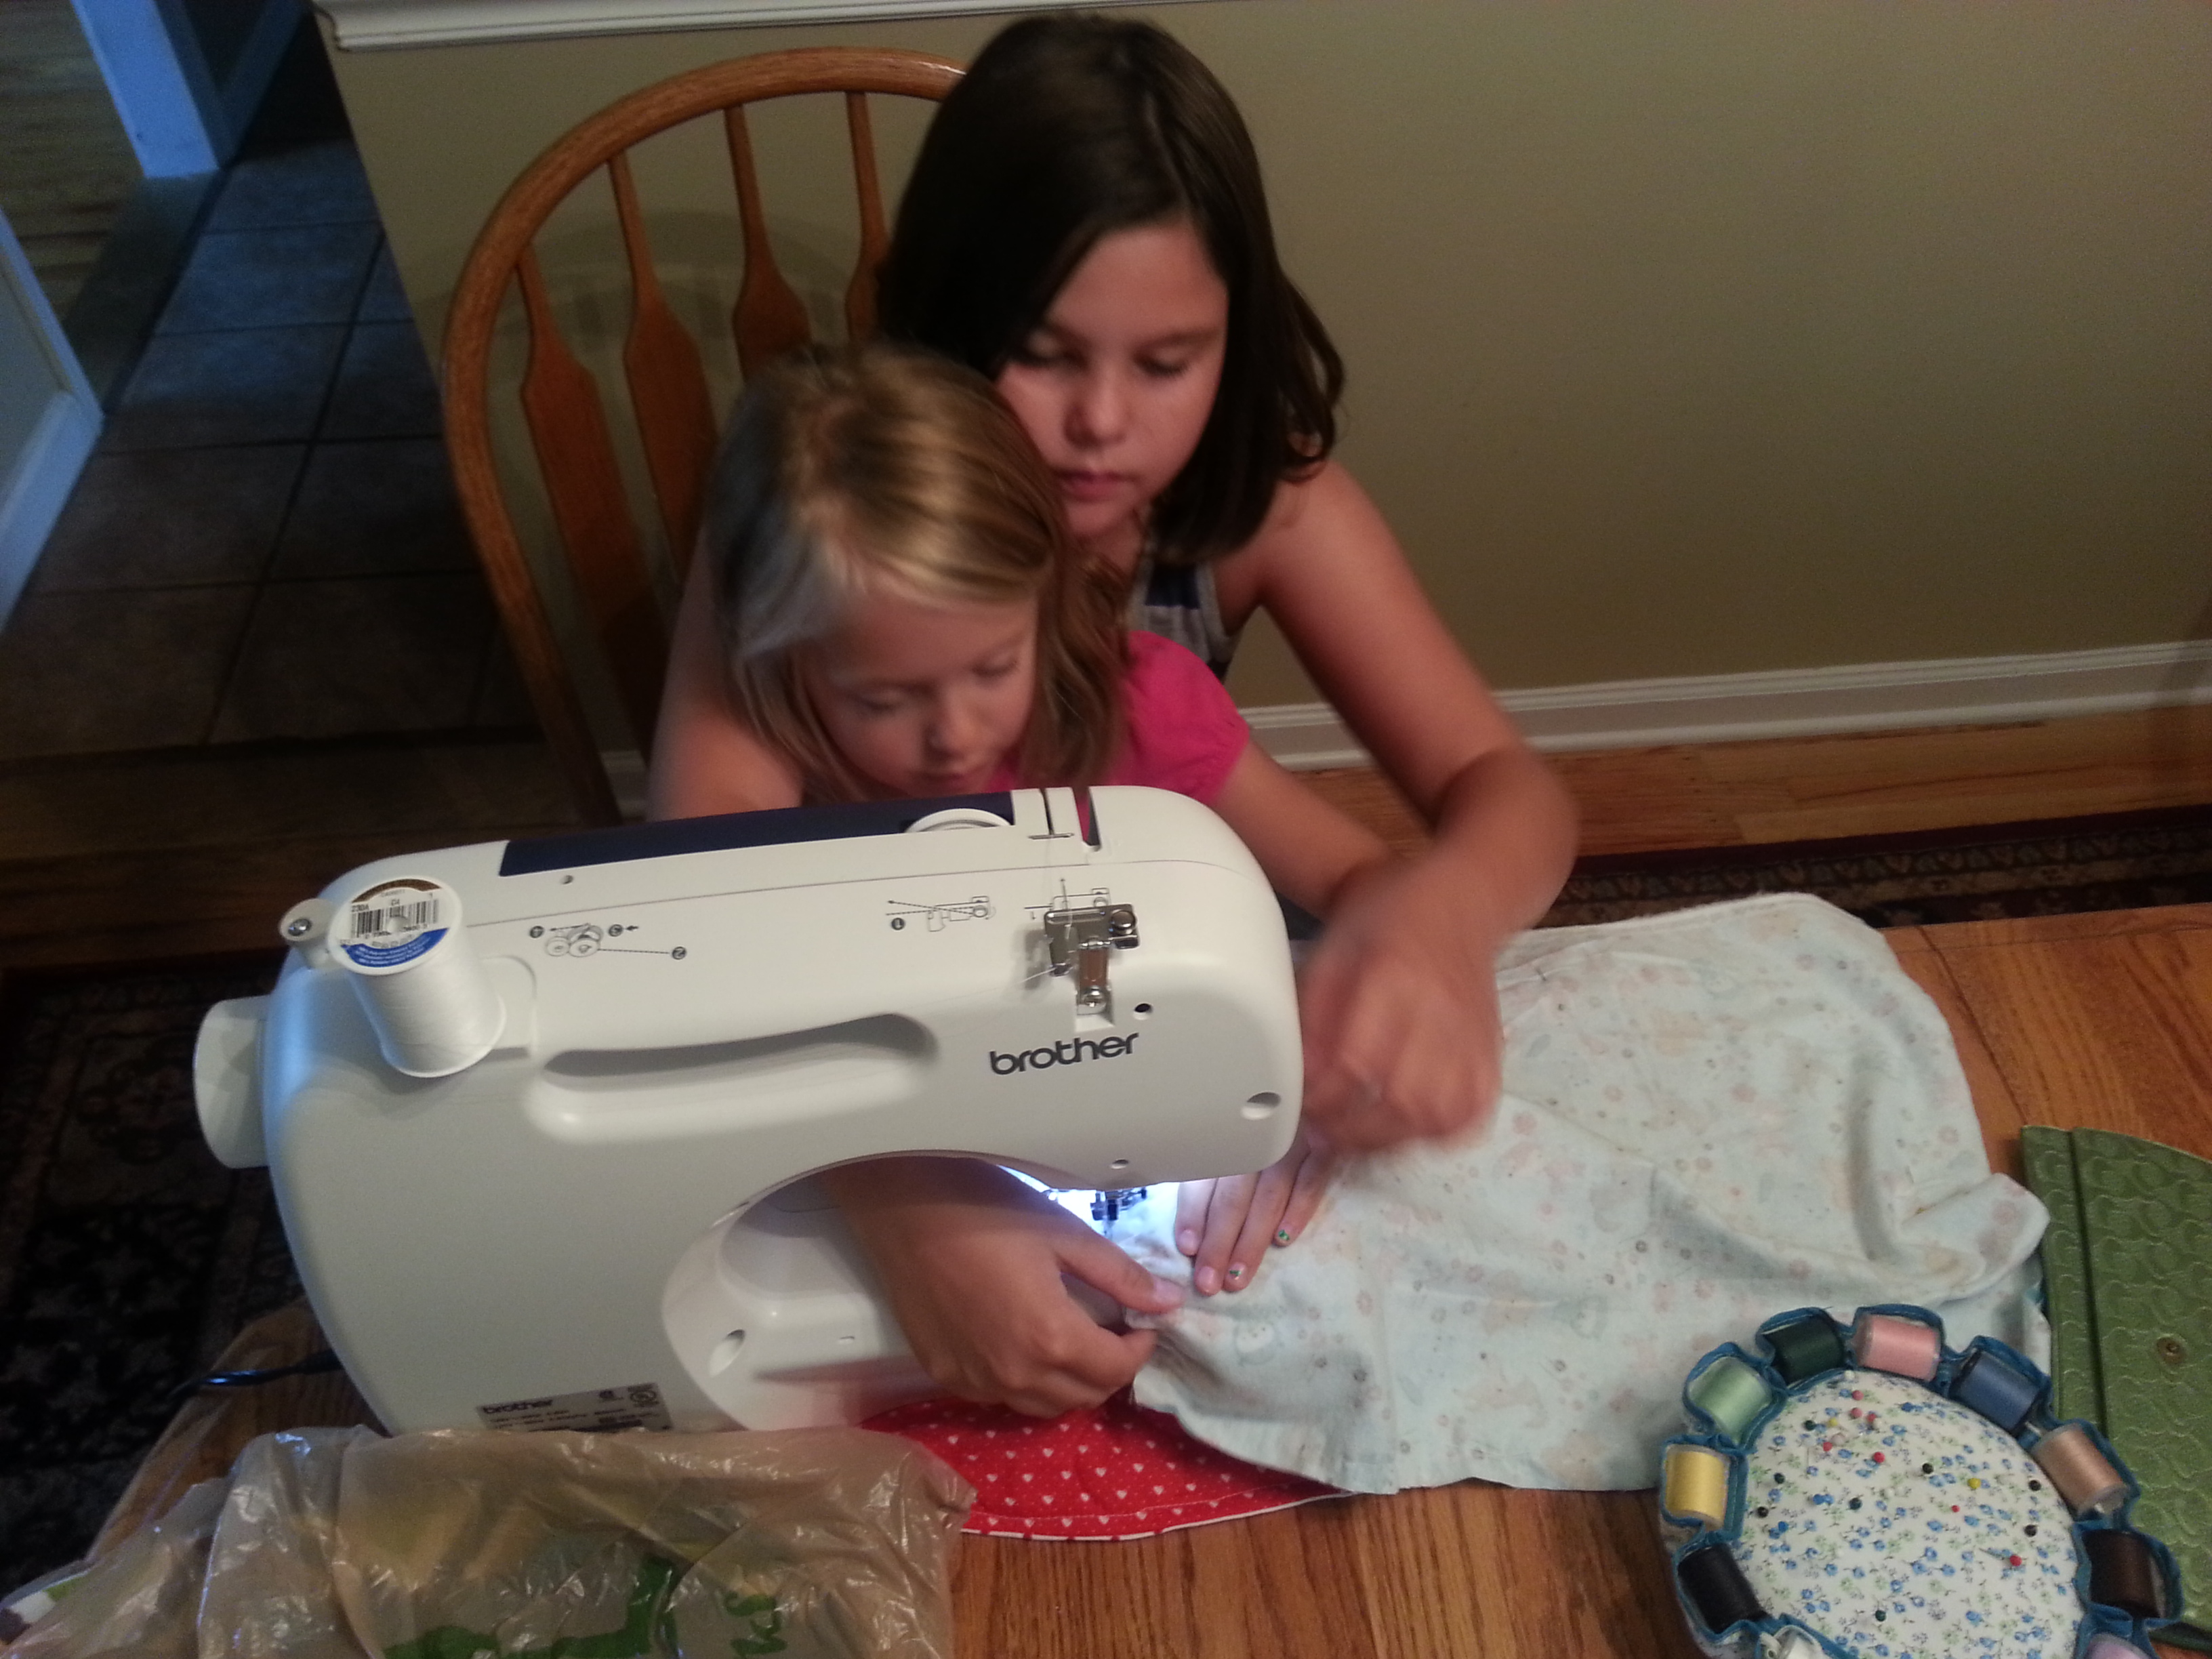 Me teaching my other cousin how to sew